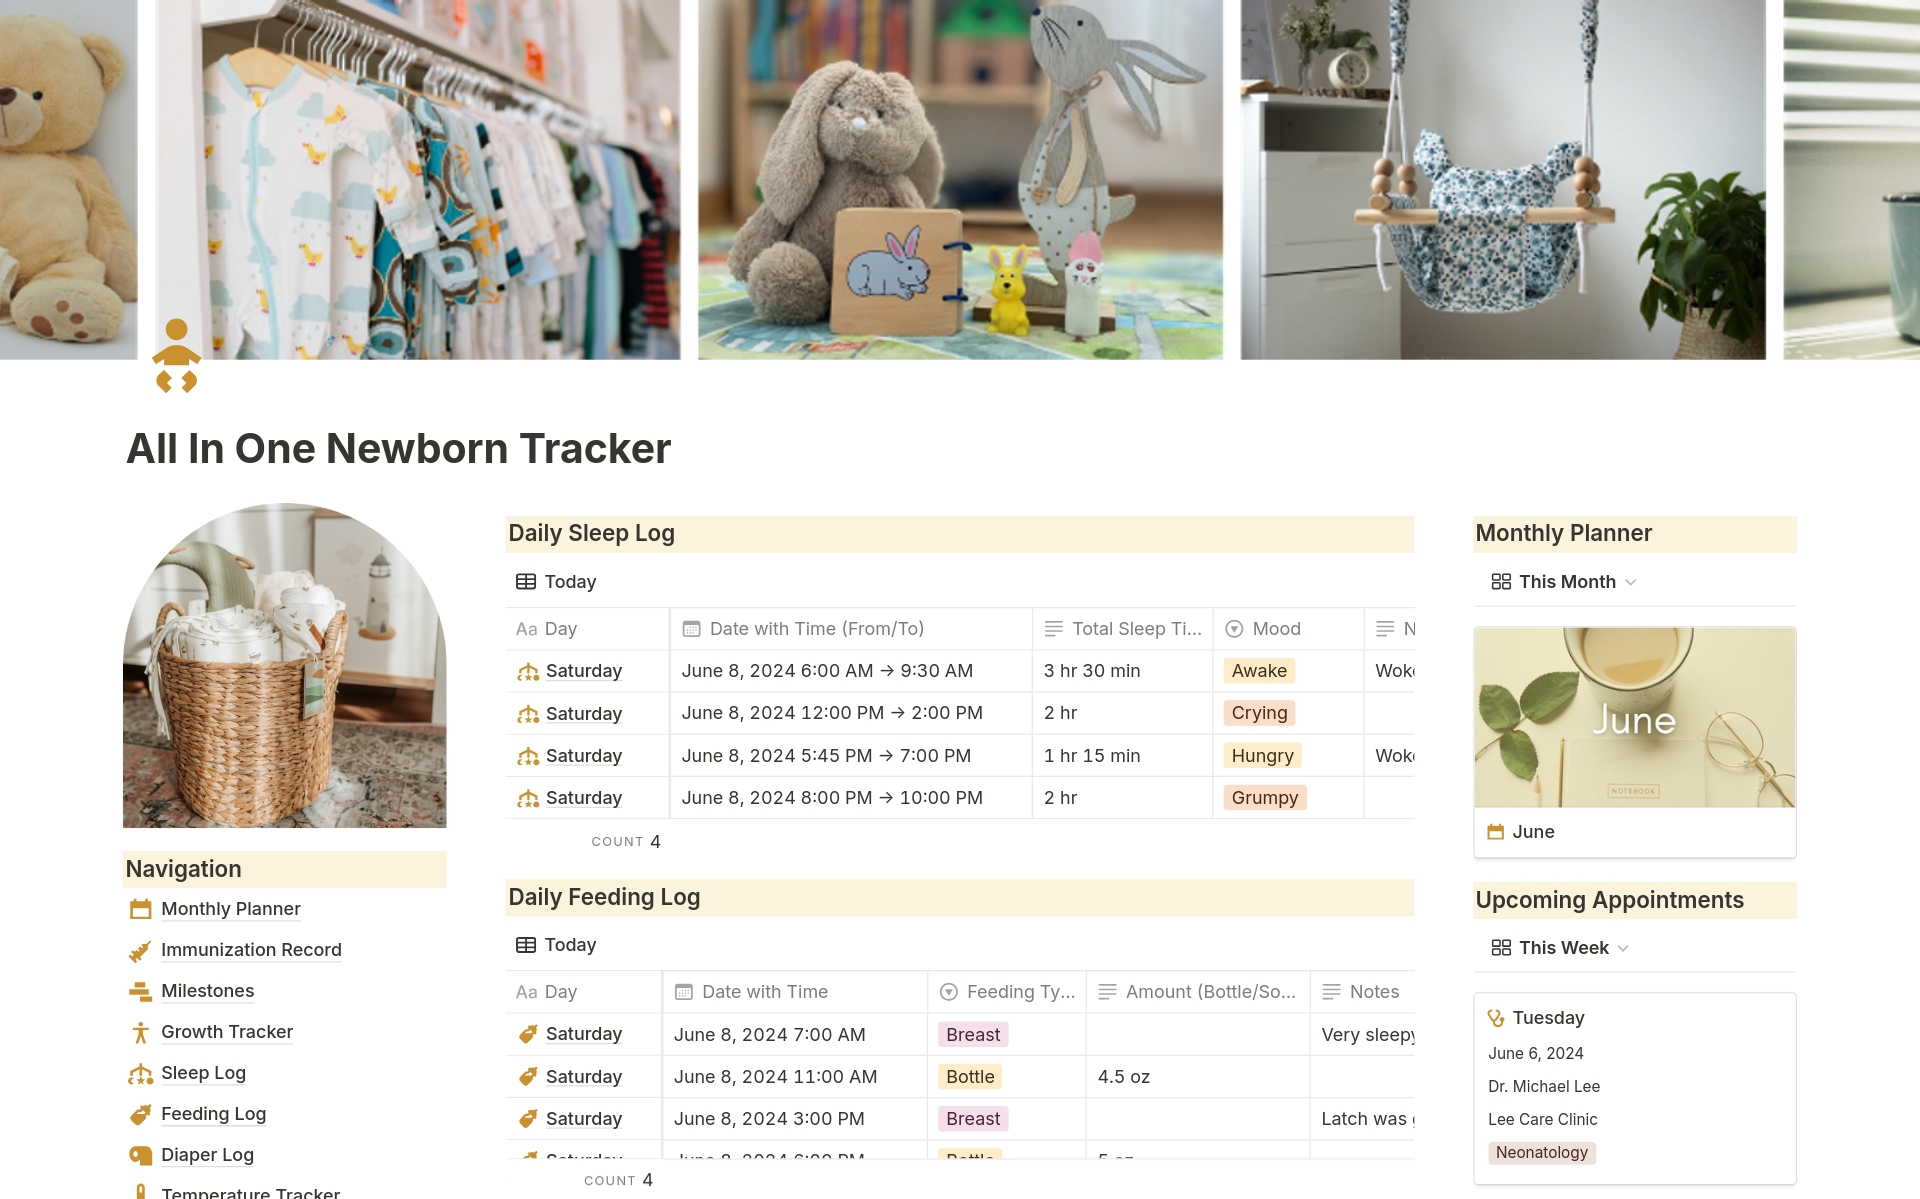 All in One Notion Newborn Tracker Template for Moms and Parents - Aesthetic New Baby Care Template for Daily Nursery Management. Simplify your newborn's routine with this comprehensive Notion baby tracker template.